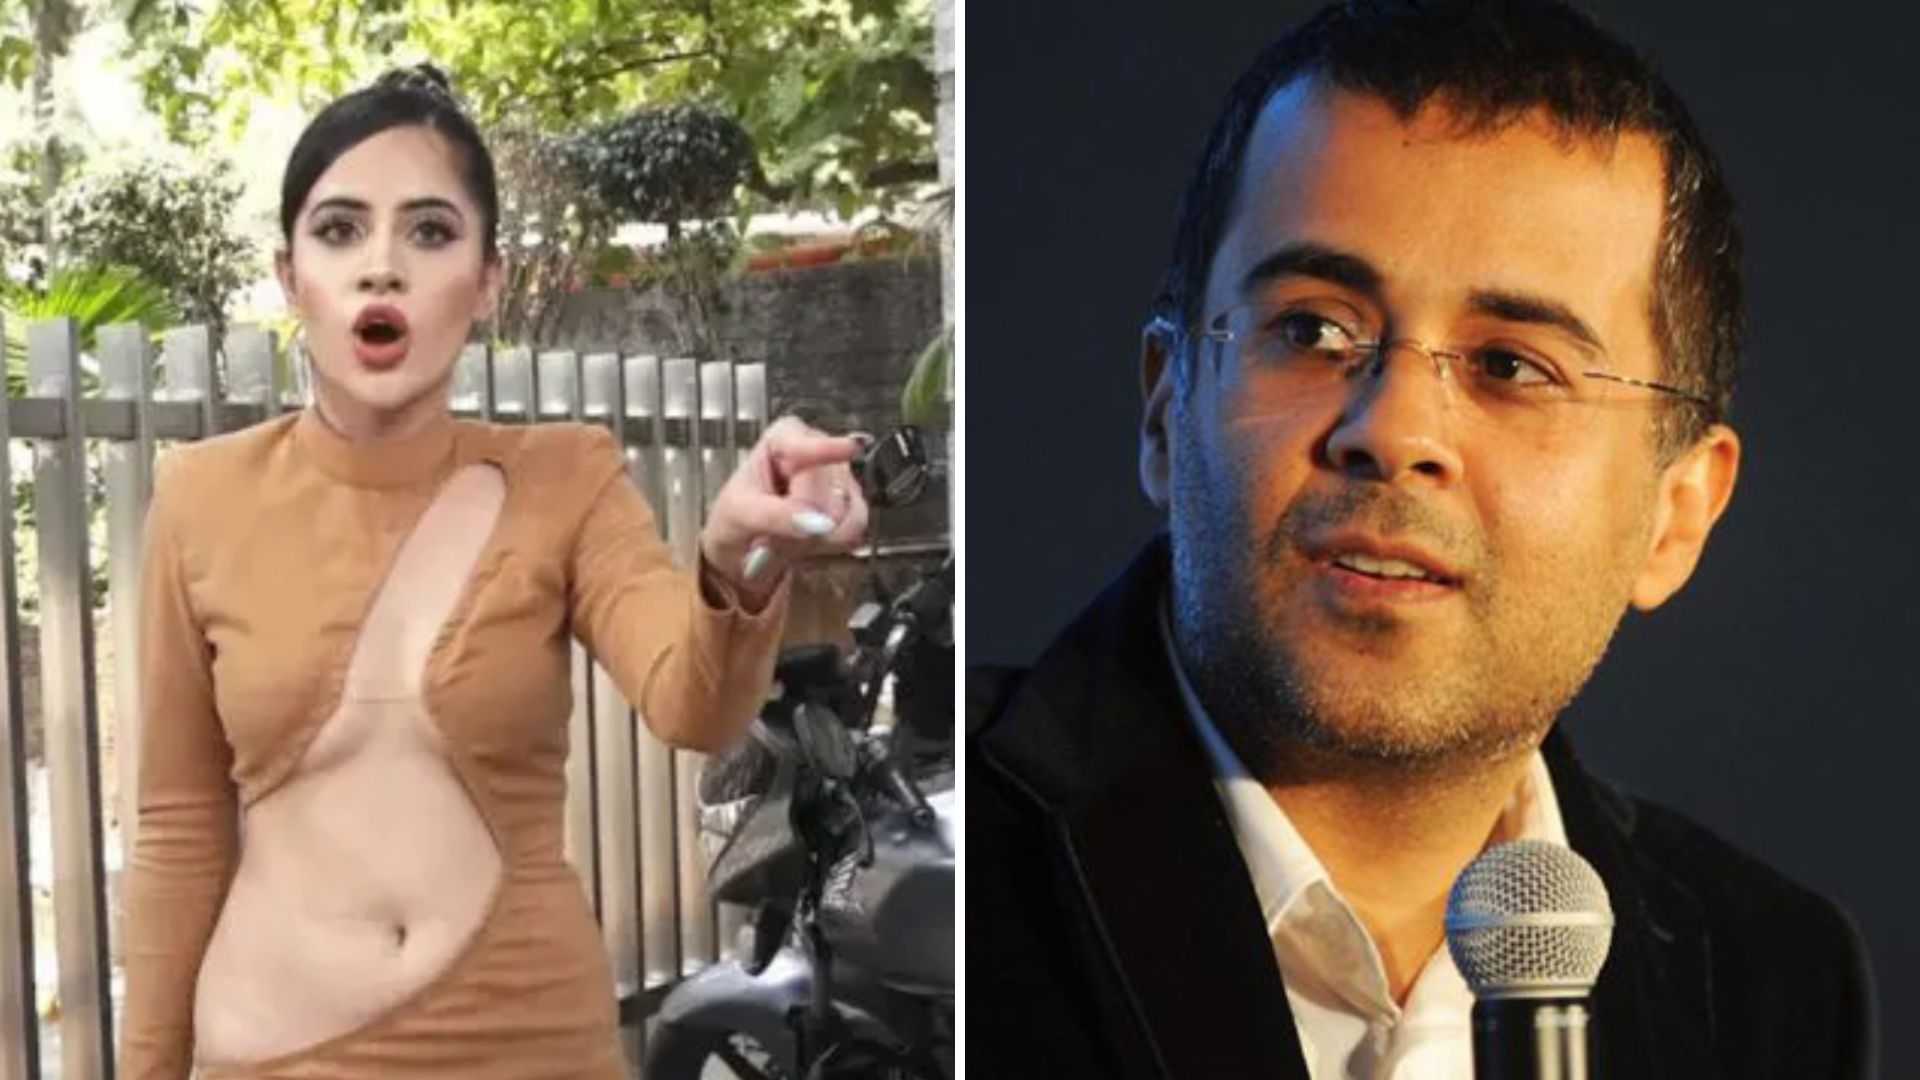 'It's fake, a lie' : Chetan Bhagat denies allegations by Urfi Javed of sending intimate texts to young girls